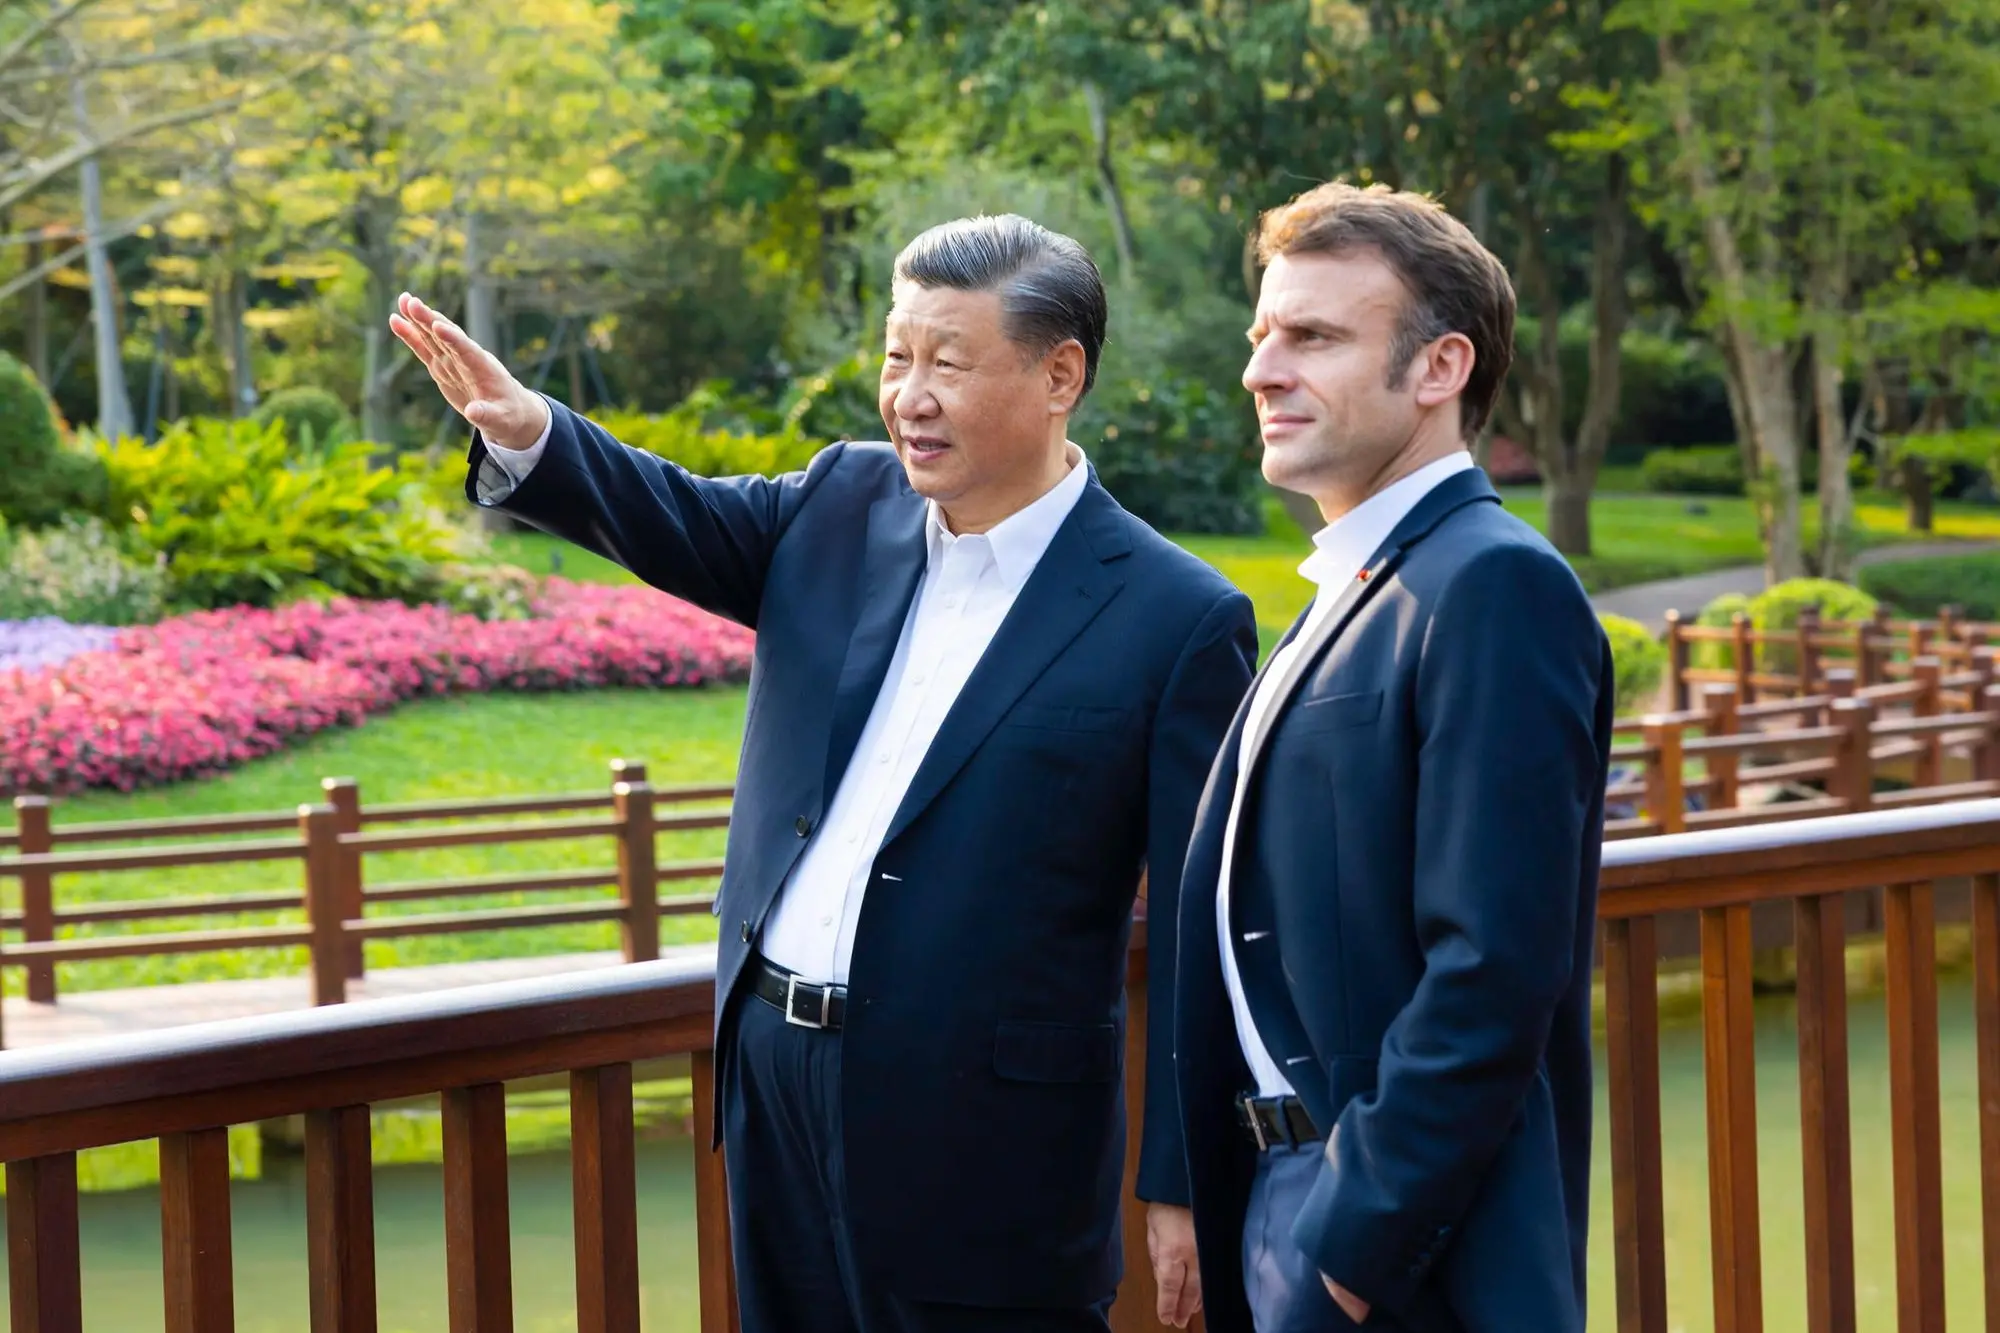 epa10564460 Chinese President Xi Jinping (L) and French President Emmanuel Macron (R) chat during a stroll through the Pine Garden in Guangzhou, Guangdong Province, China, 07 April 2023 (issued 08 April 2023). EPA/XINHUA / Huang Jingwen CHINA OUT / MANDATORY CREDIT EDITORIAL USE ONLY